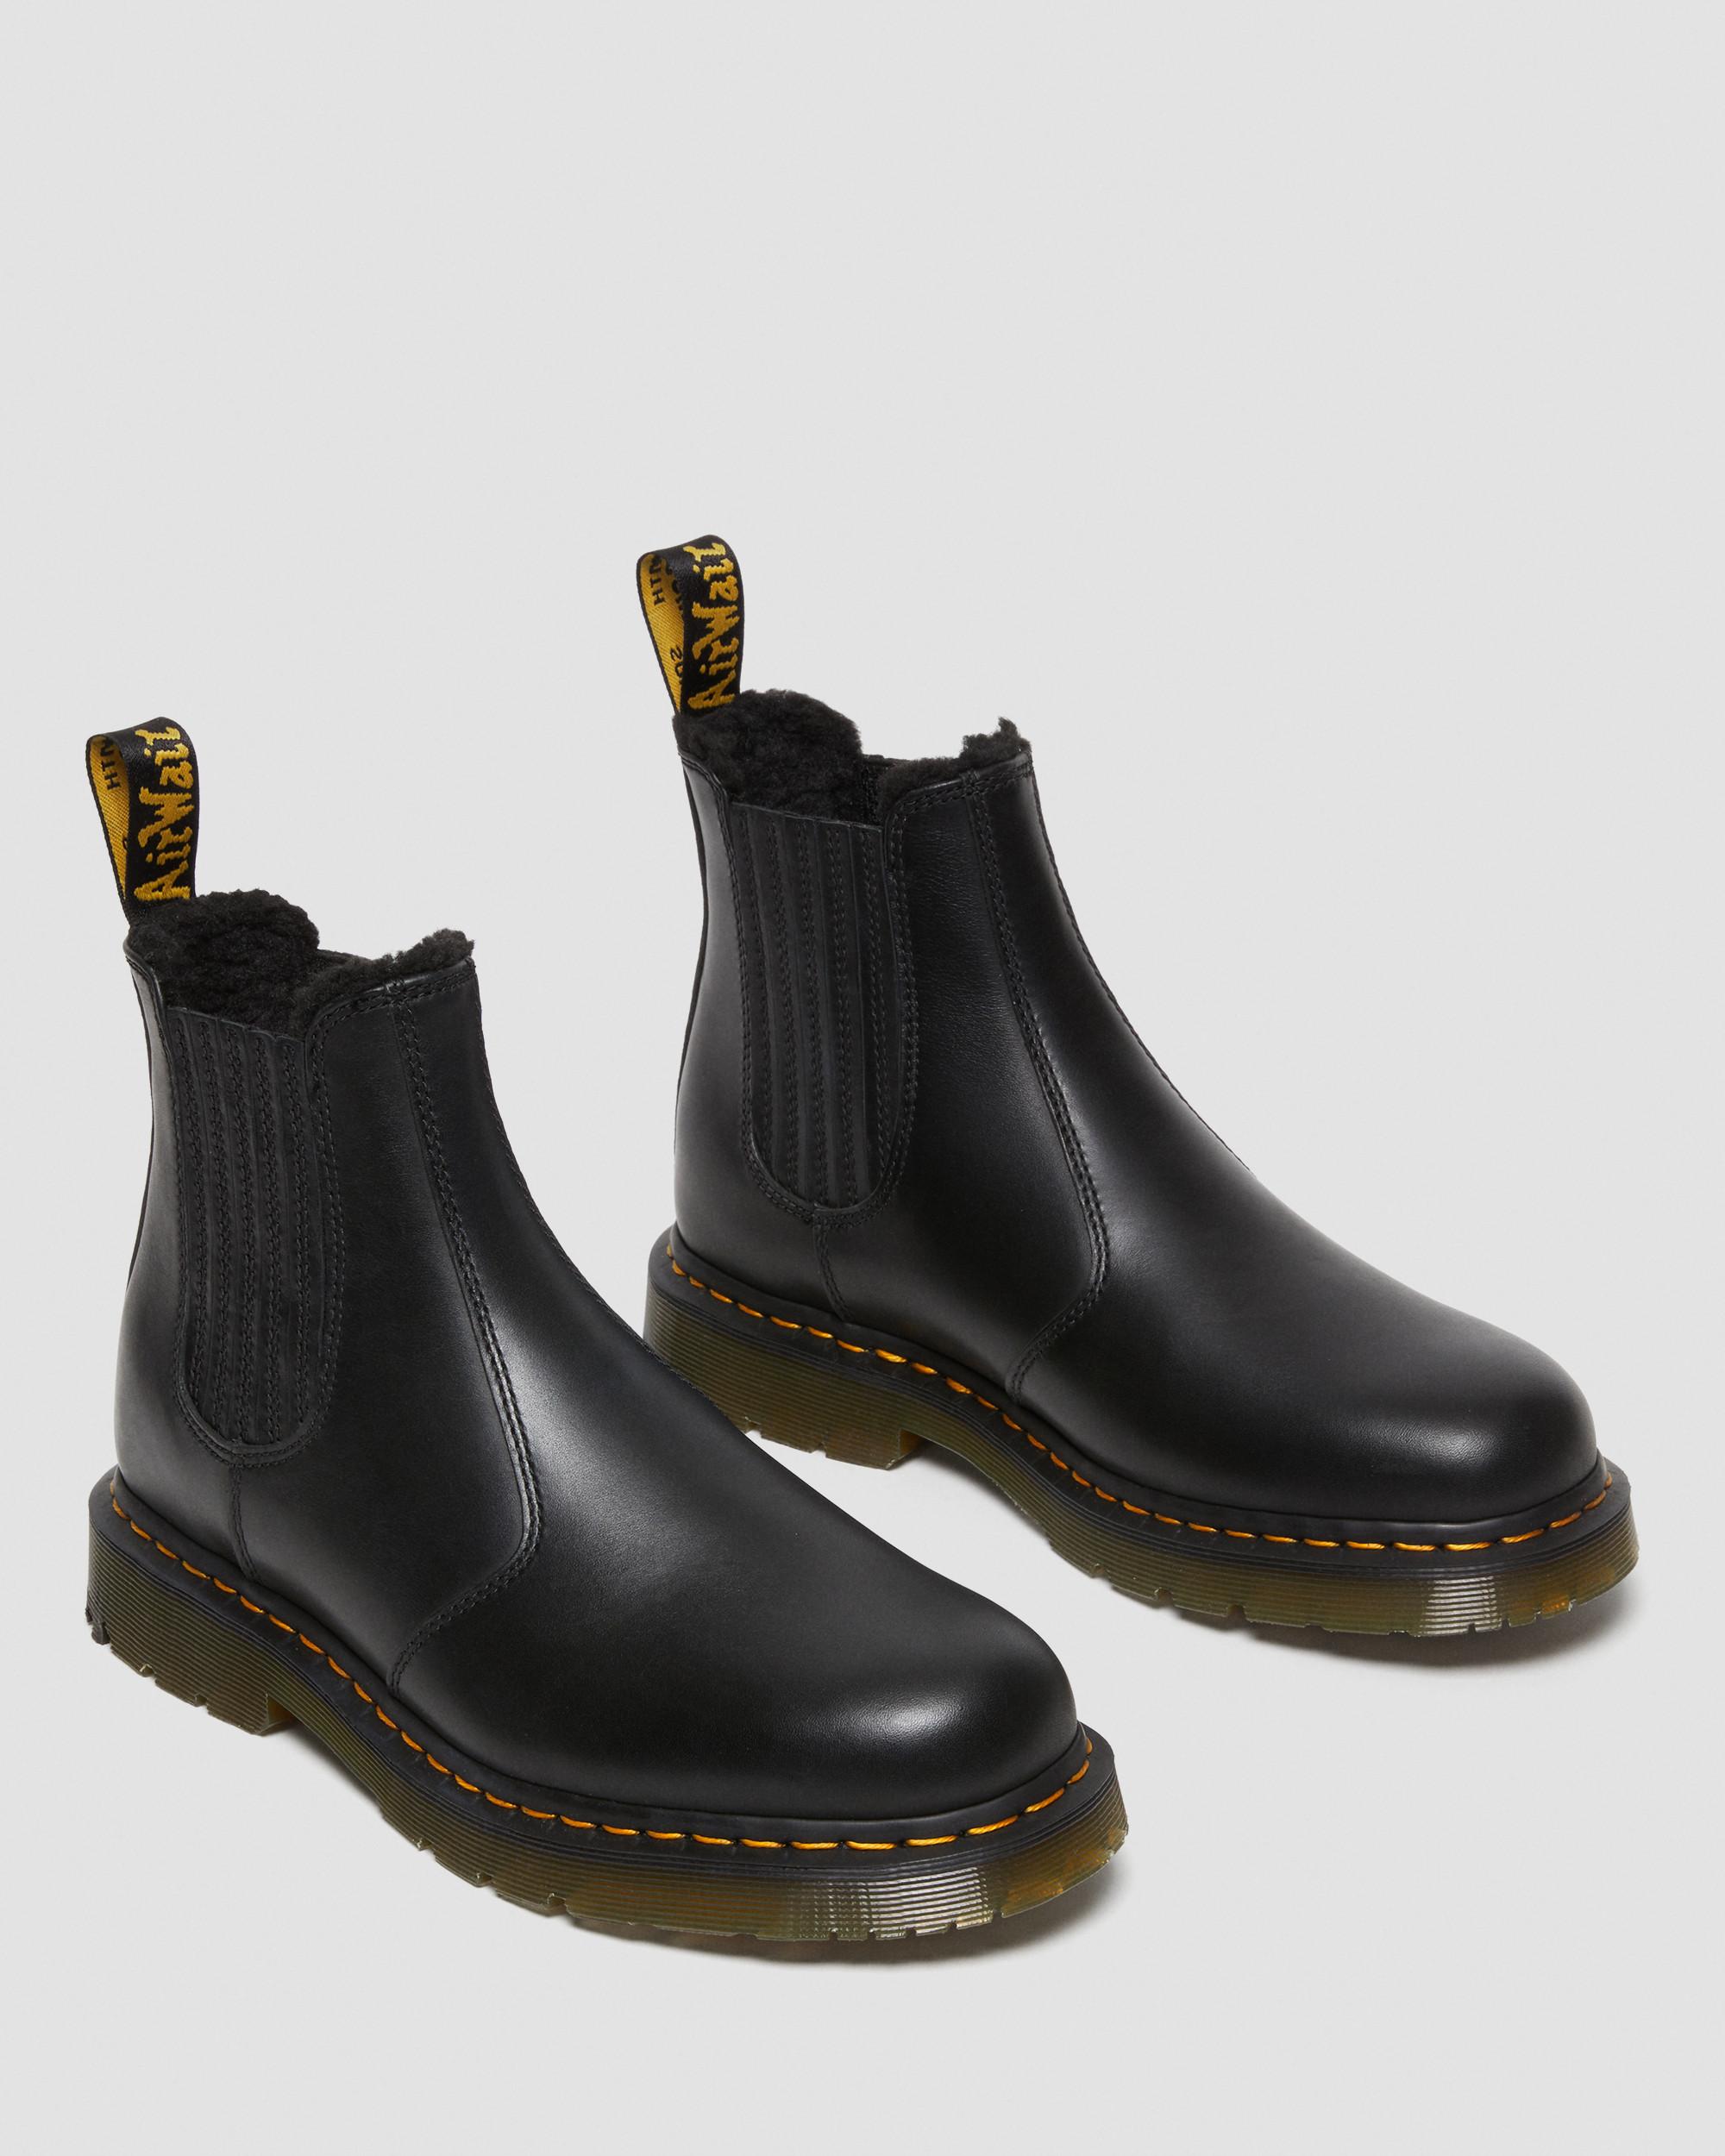 2976 DM's Wintergrip Leather Chelsea Boots in Black | Dr. Martens